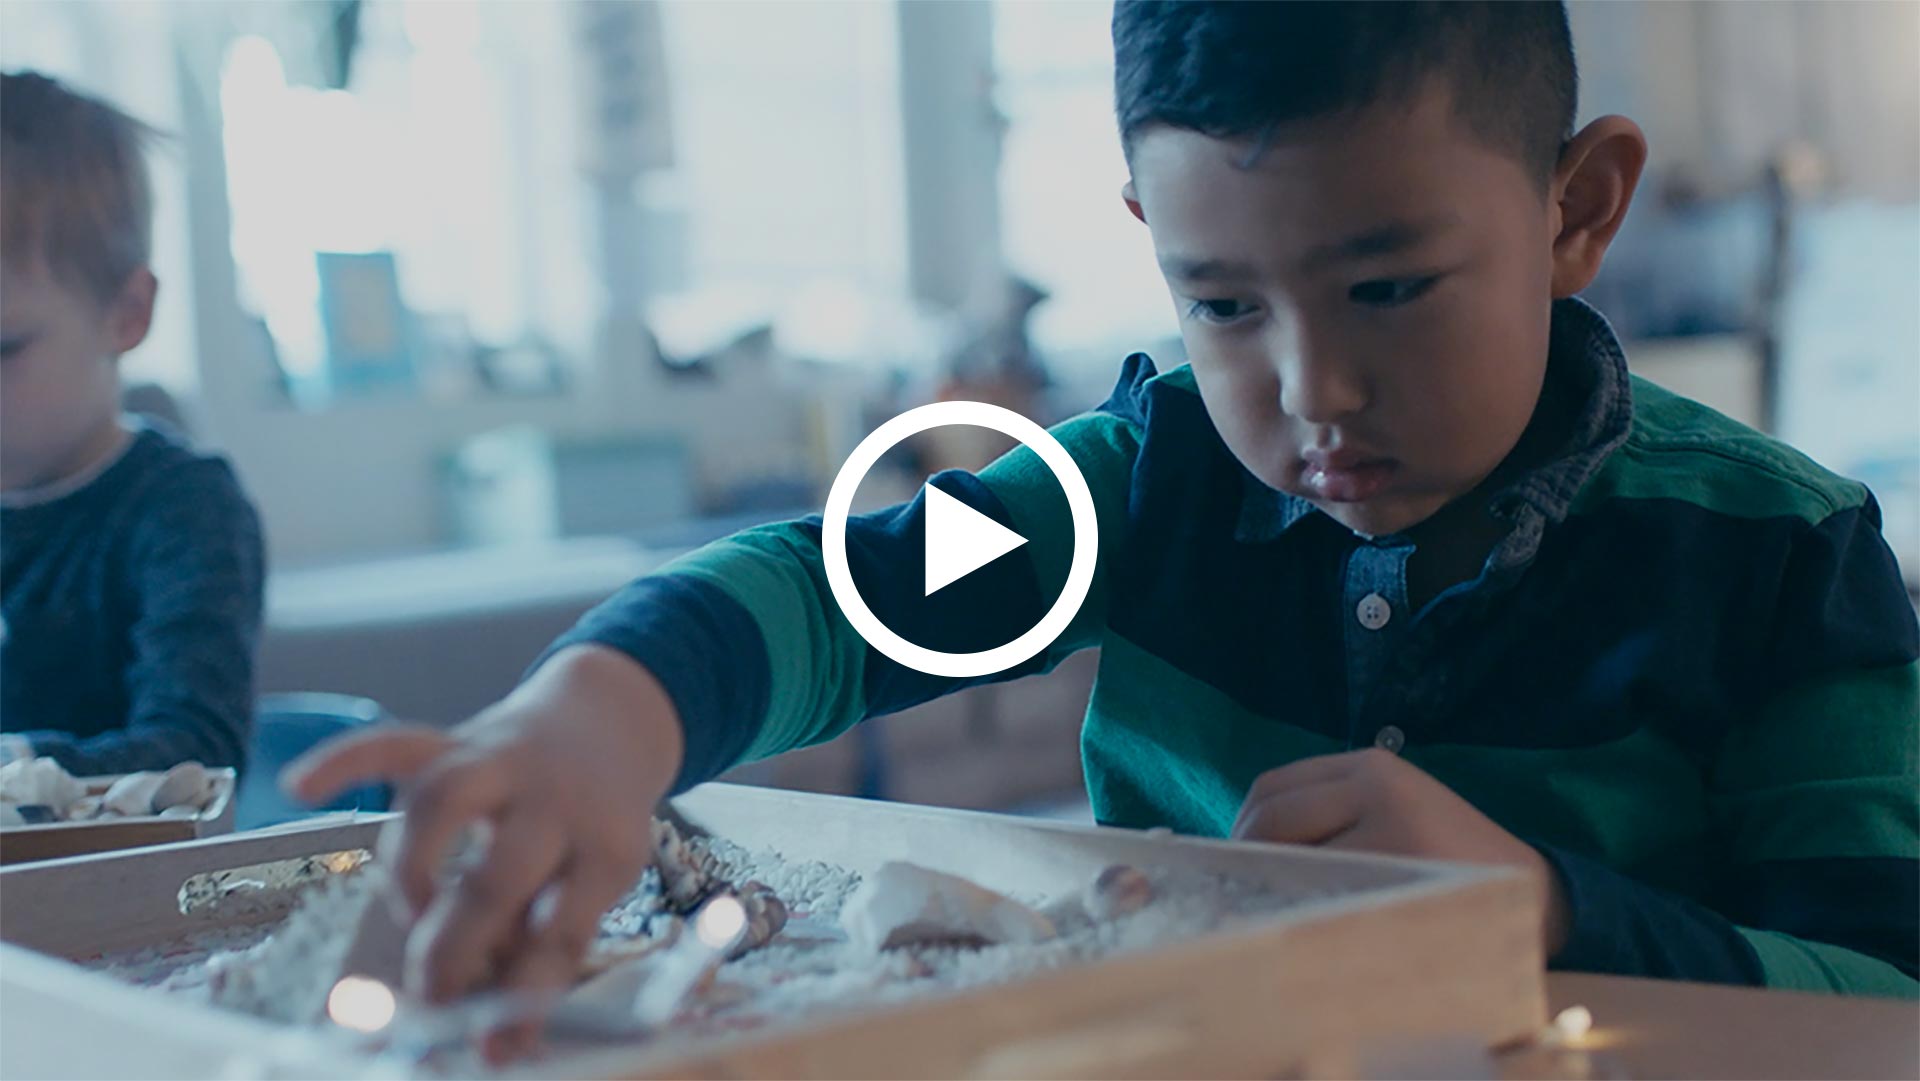 Video: boy playing with blocks